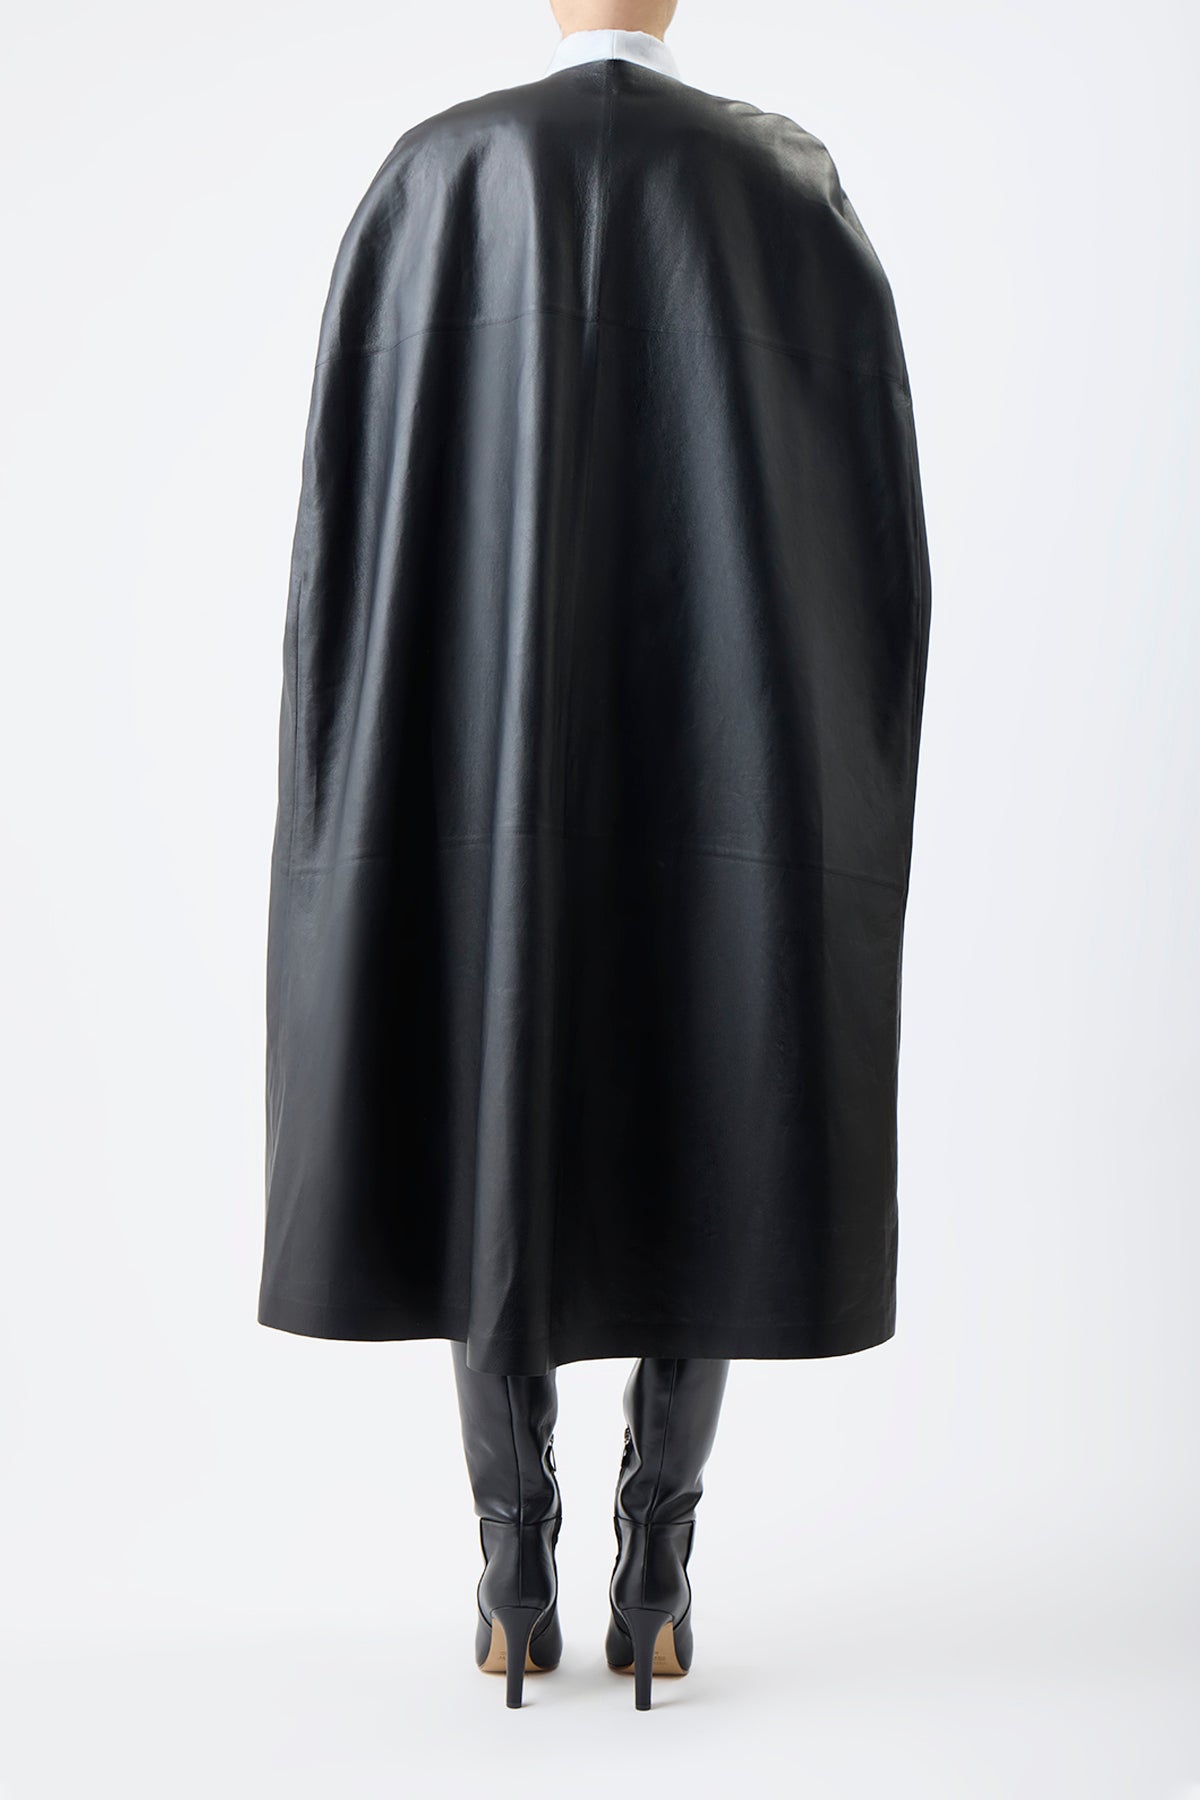 Lindlow Cape in Black Leather